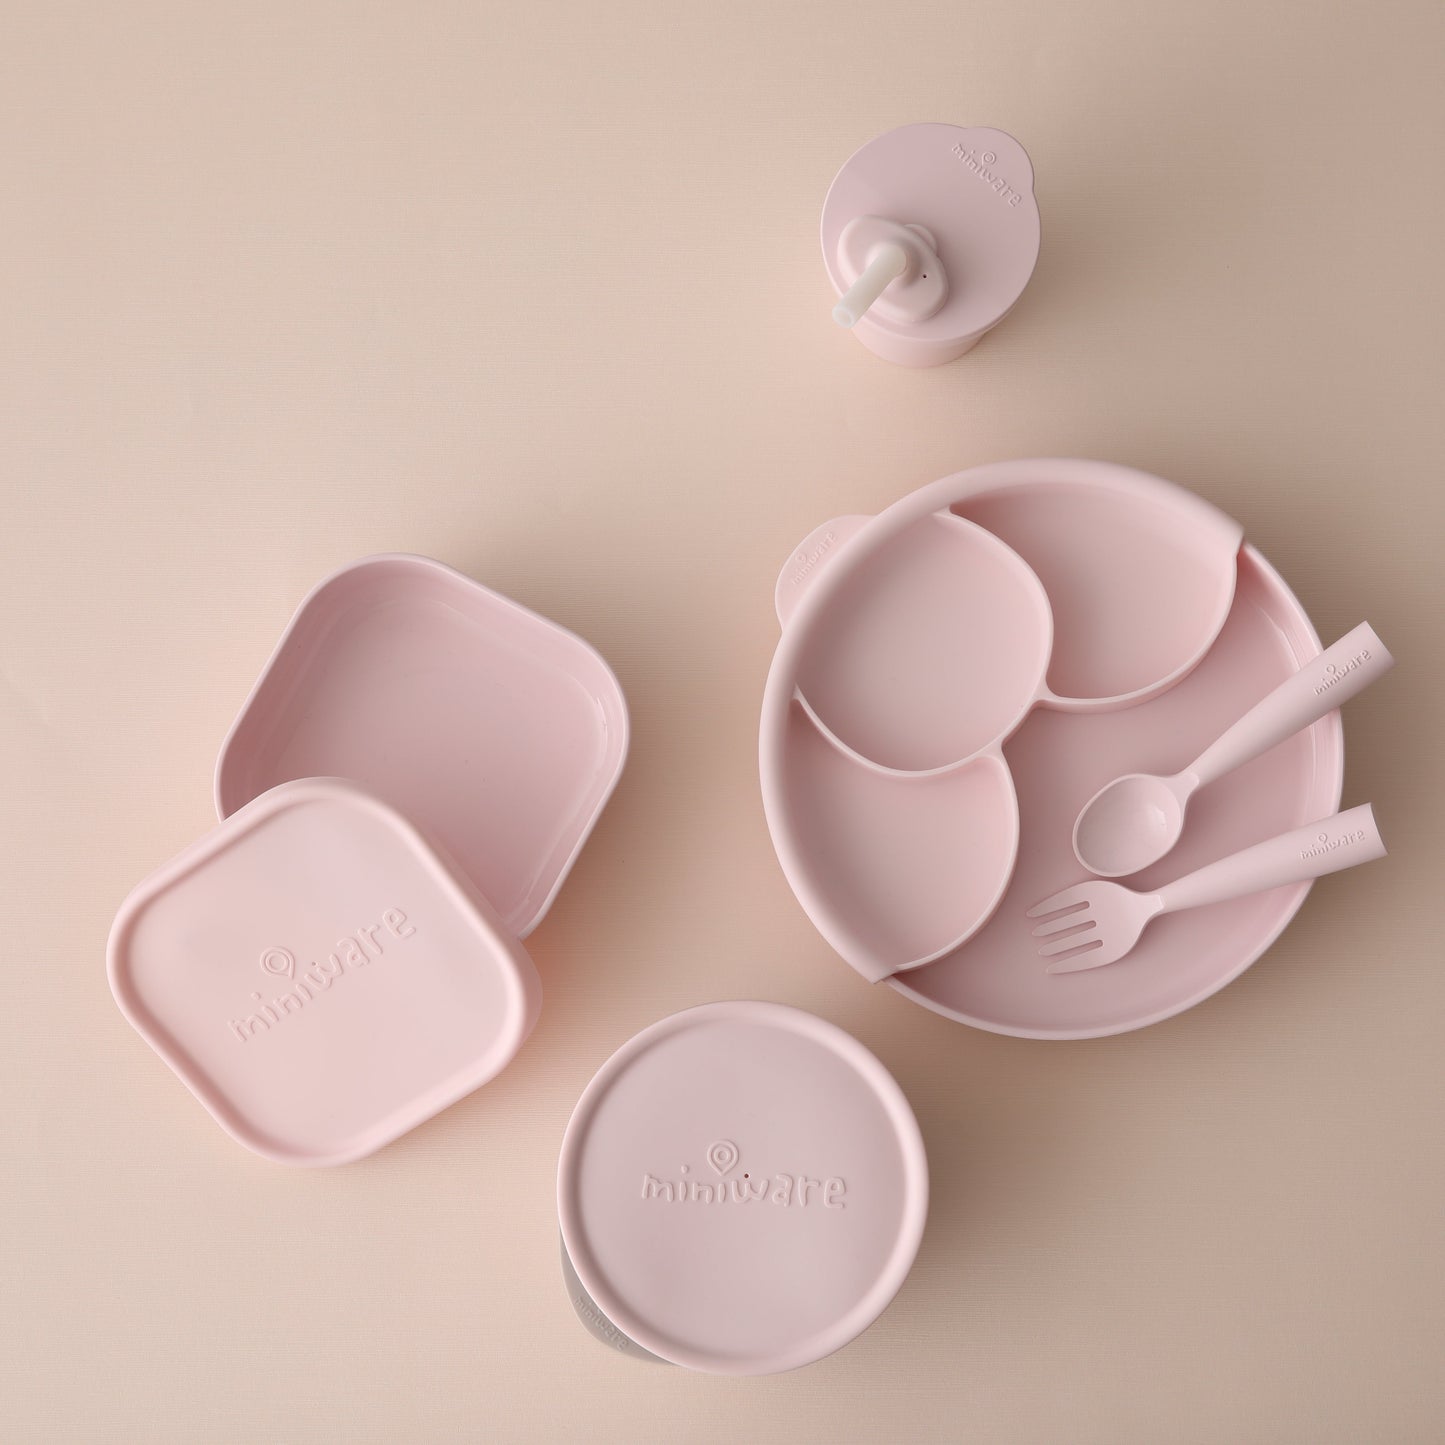 Healthy Meal Set - Divider Plate (Cotton Candy/Cotton Candy)